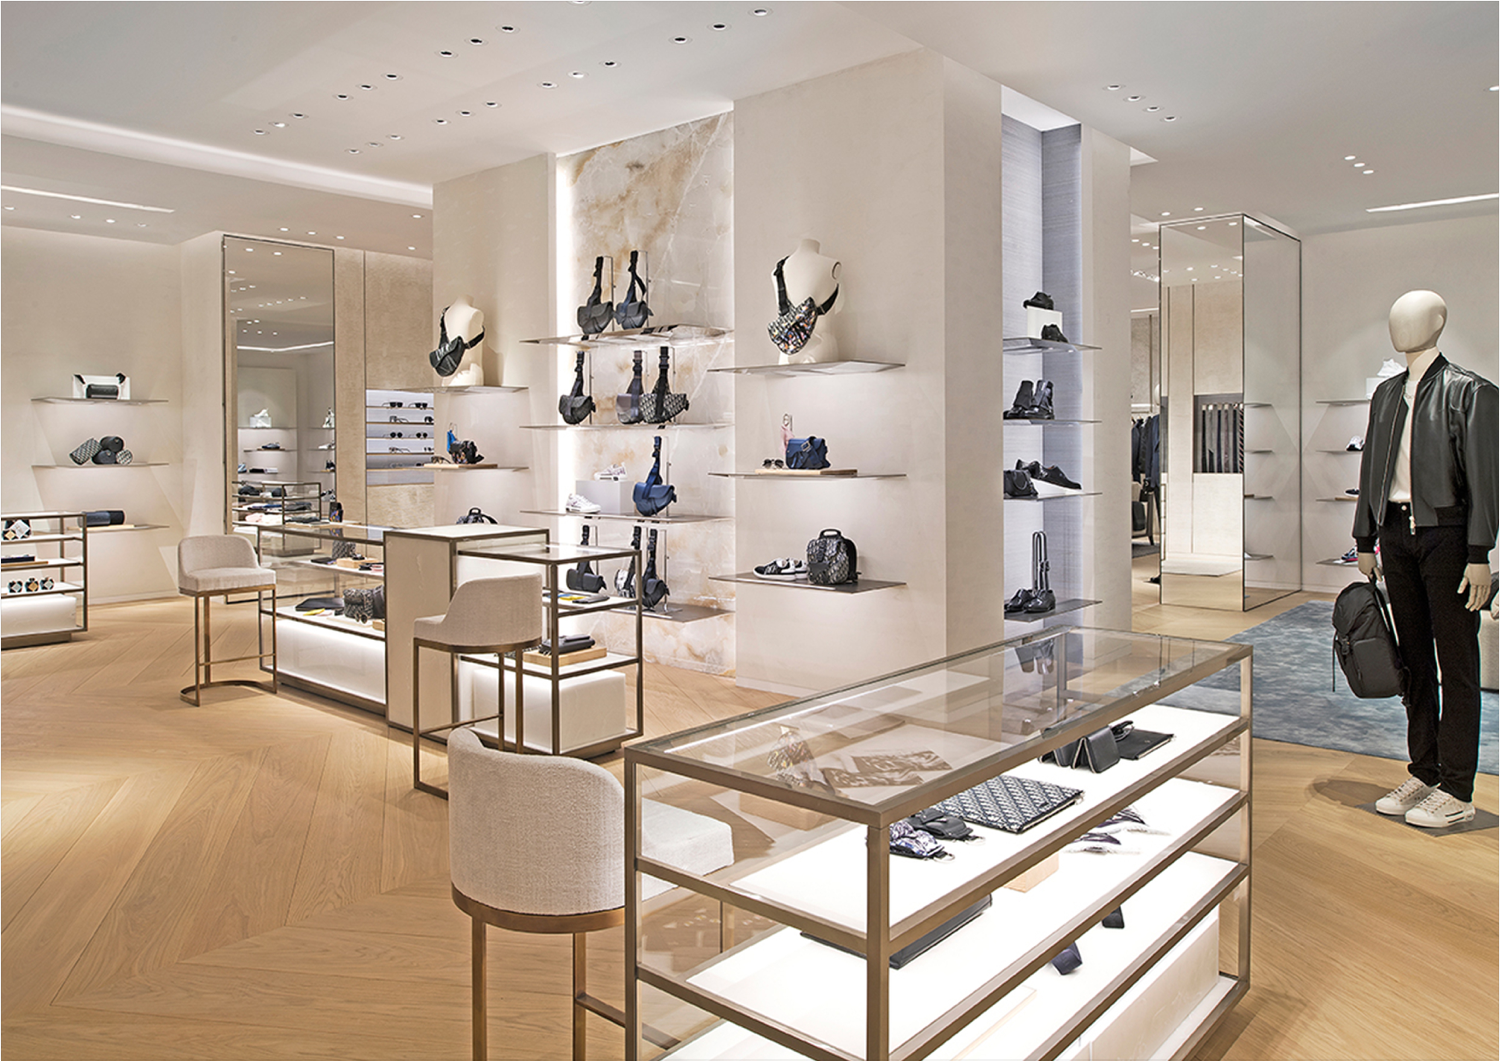 Mexico City: Dior store openings